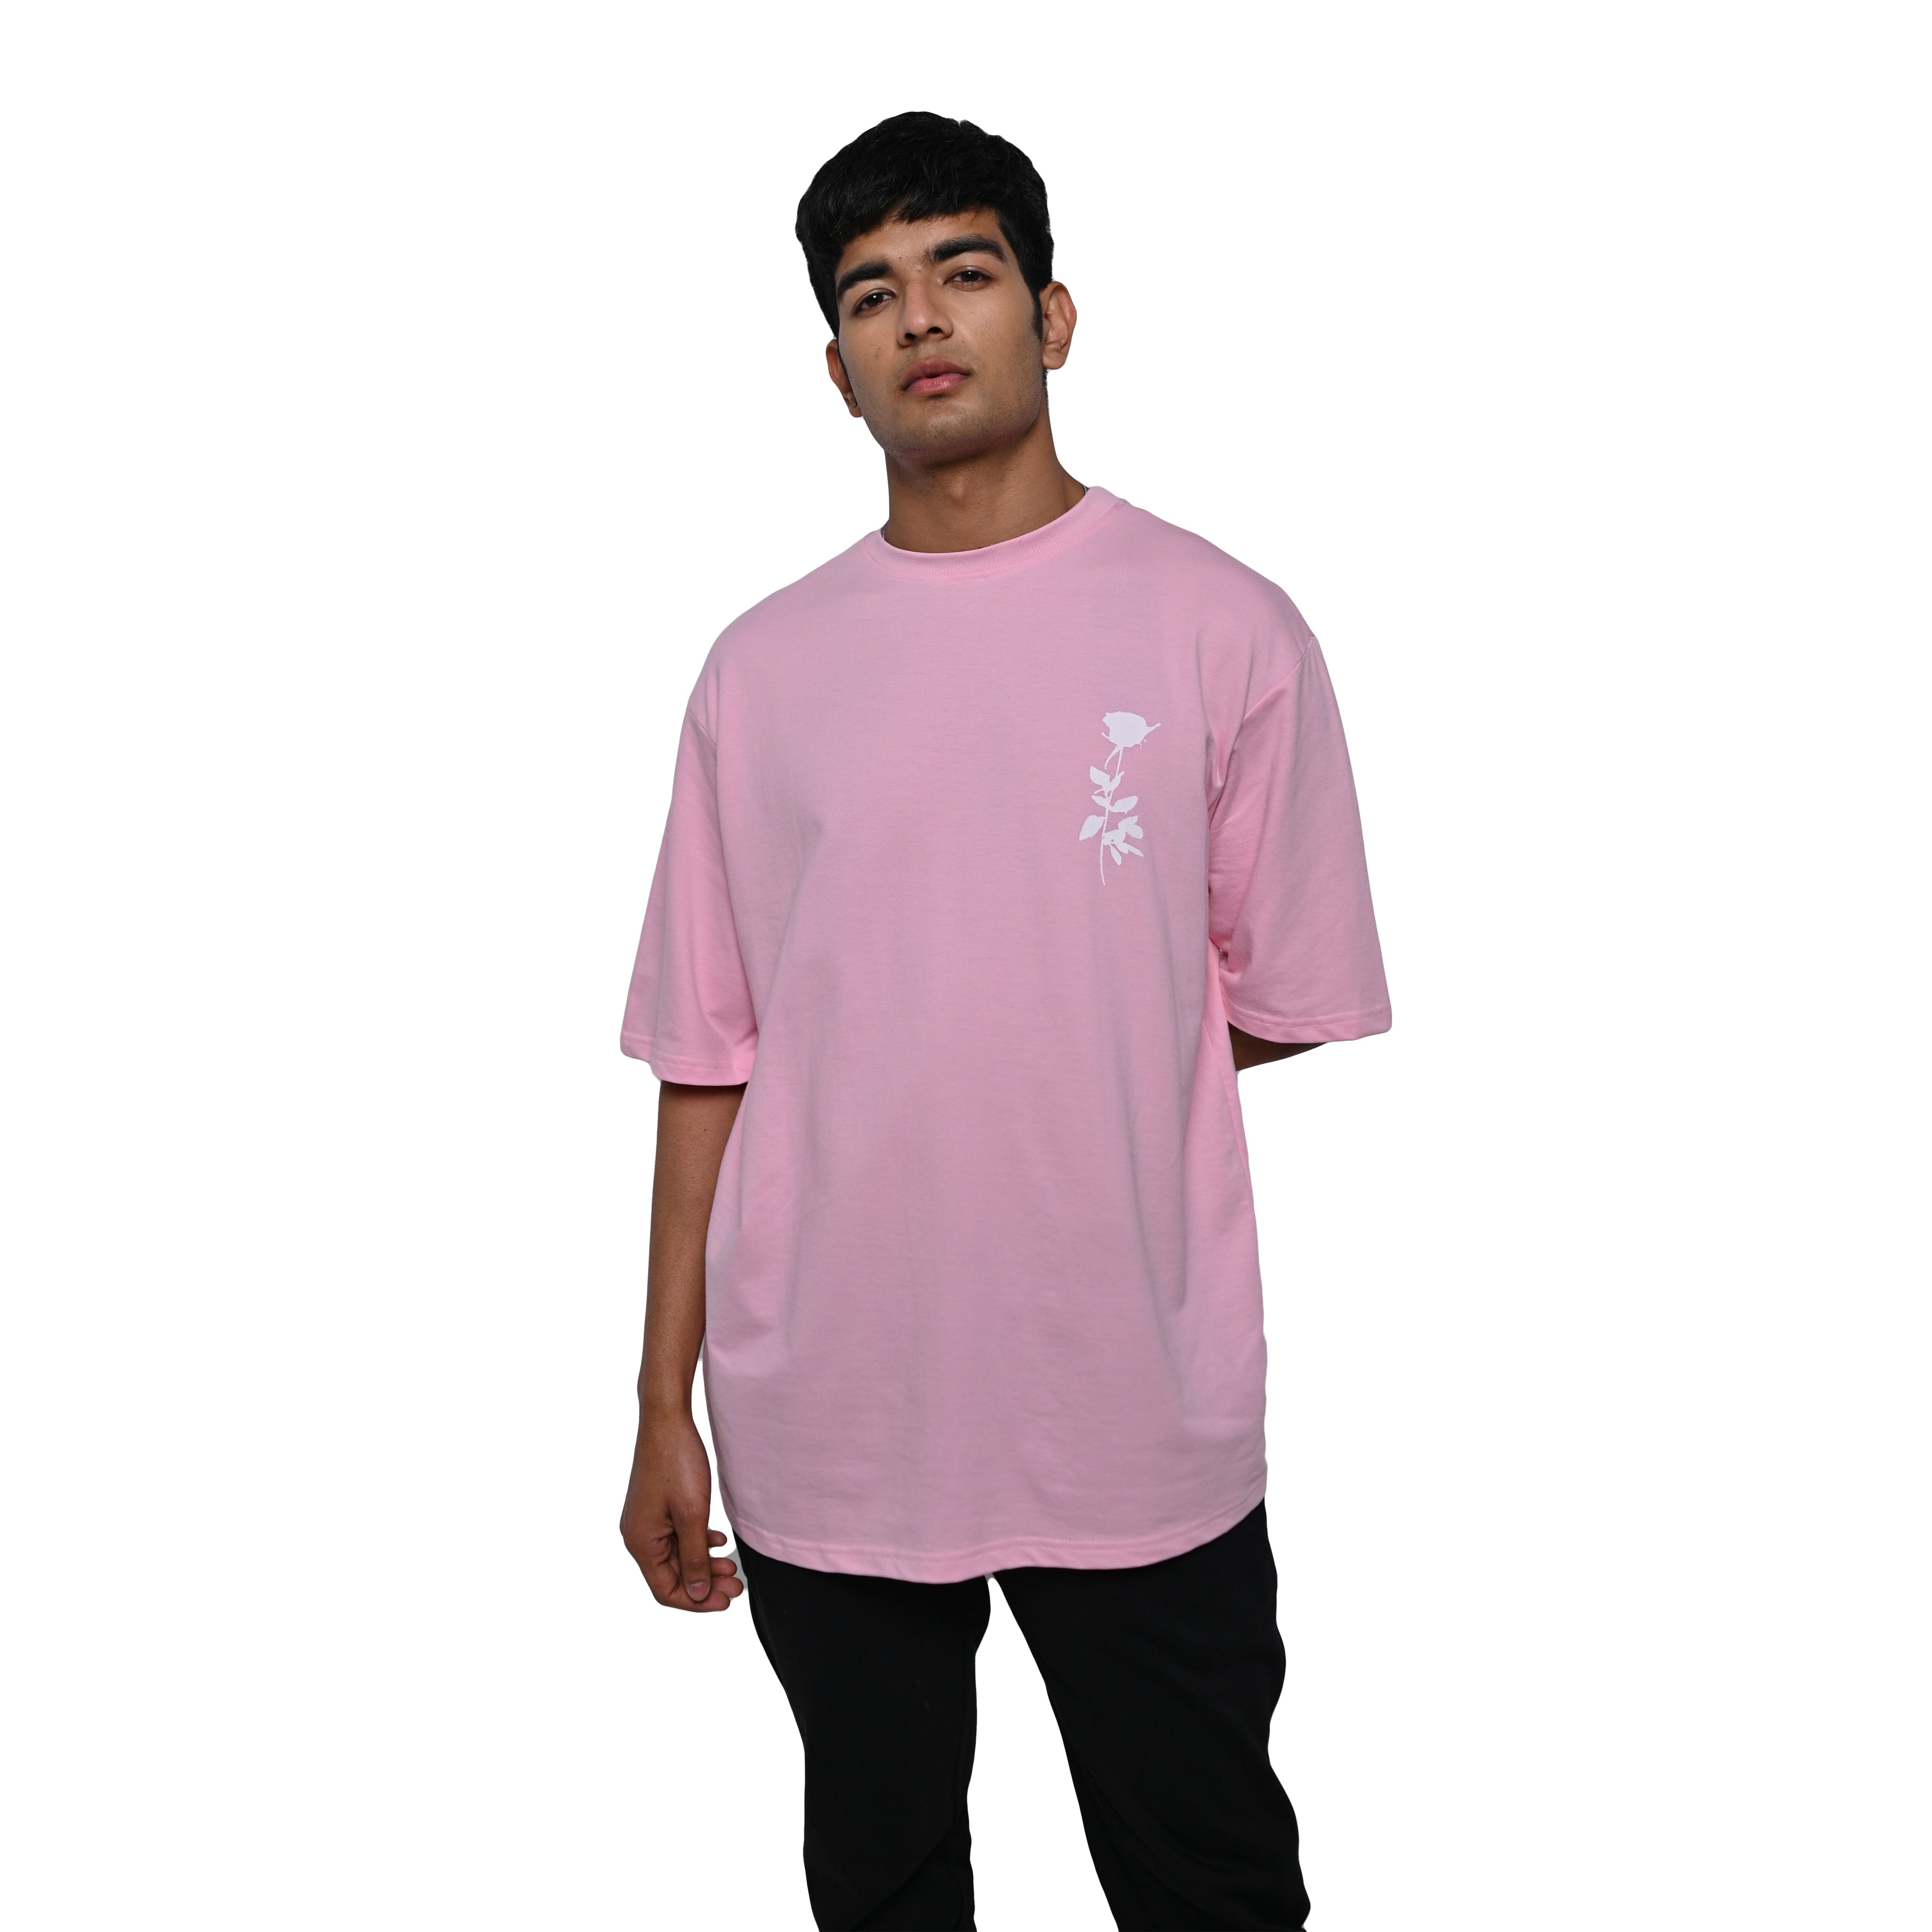 Oversized lilac t-shirt with Afterthought style print on the front side with model